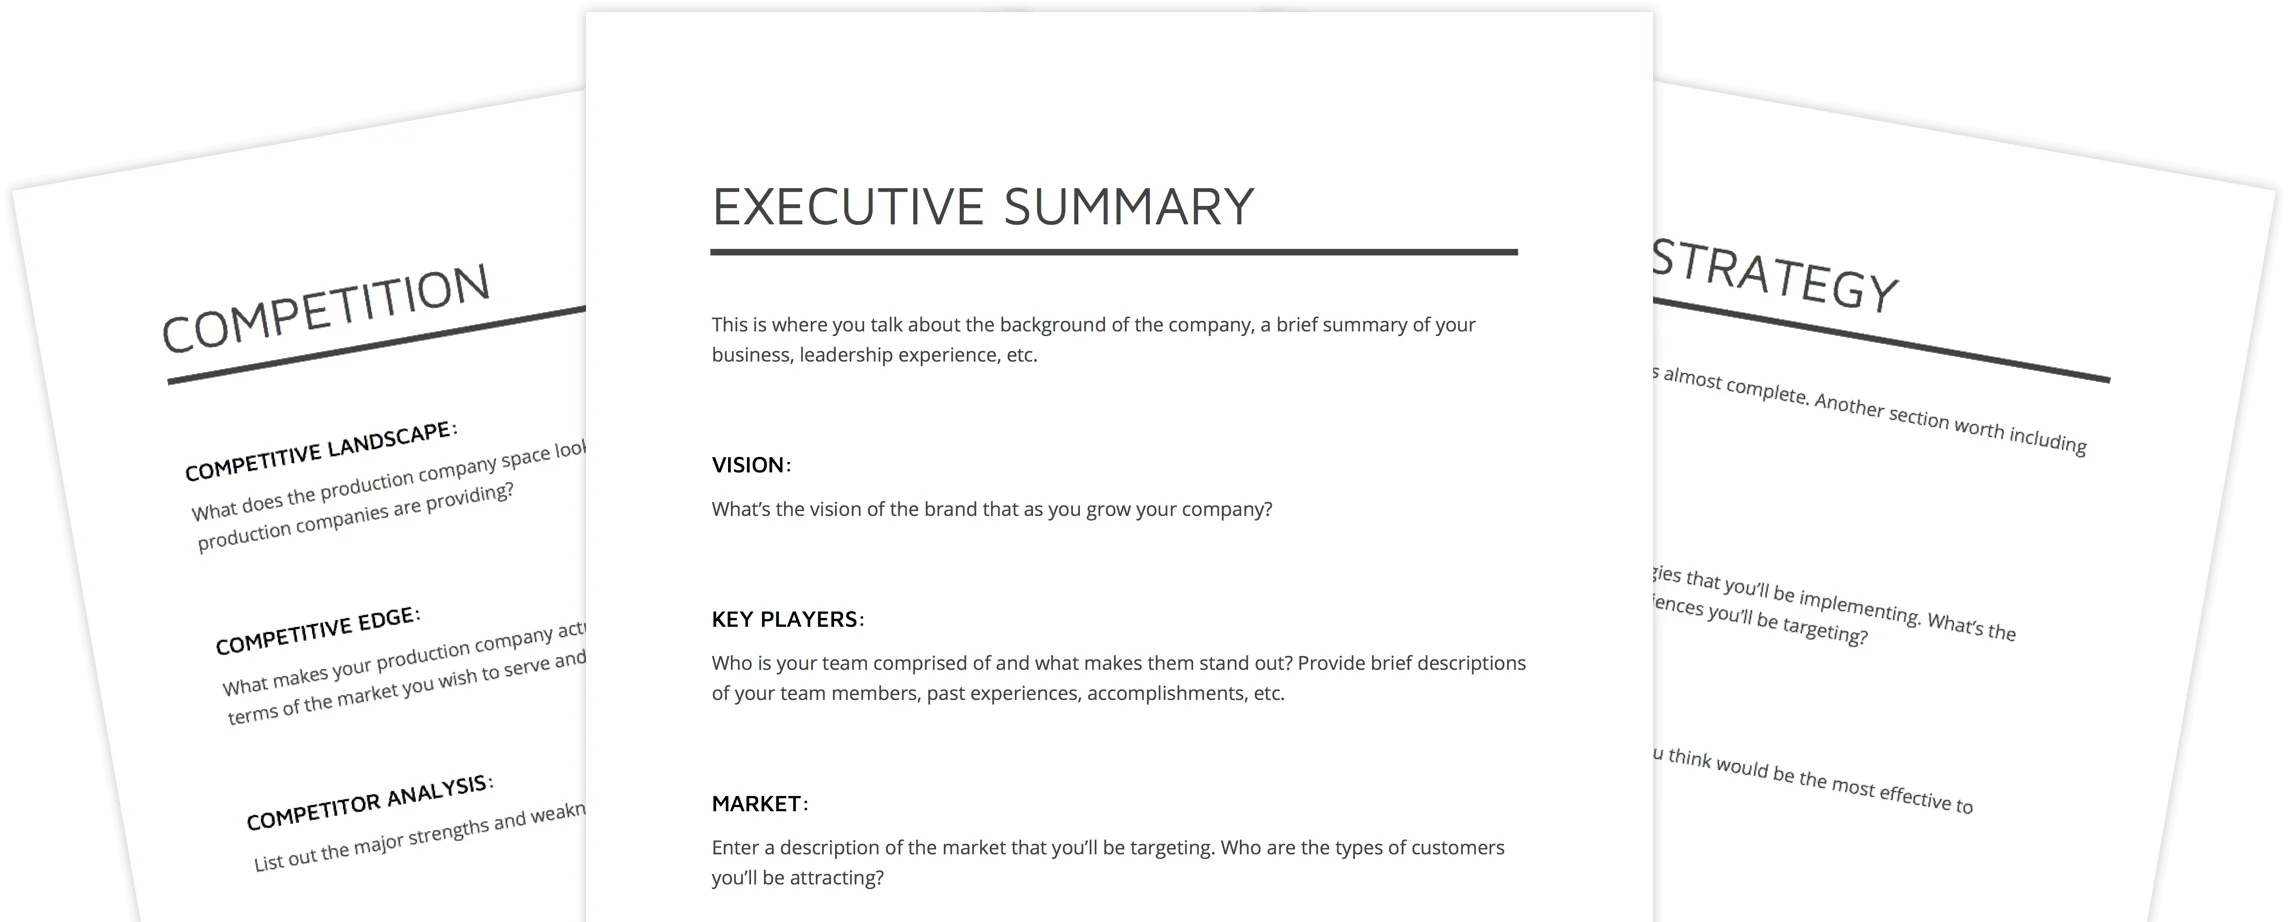 Business Plan Template for Video Production - StudioBinder